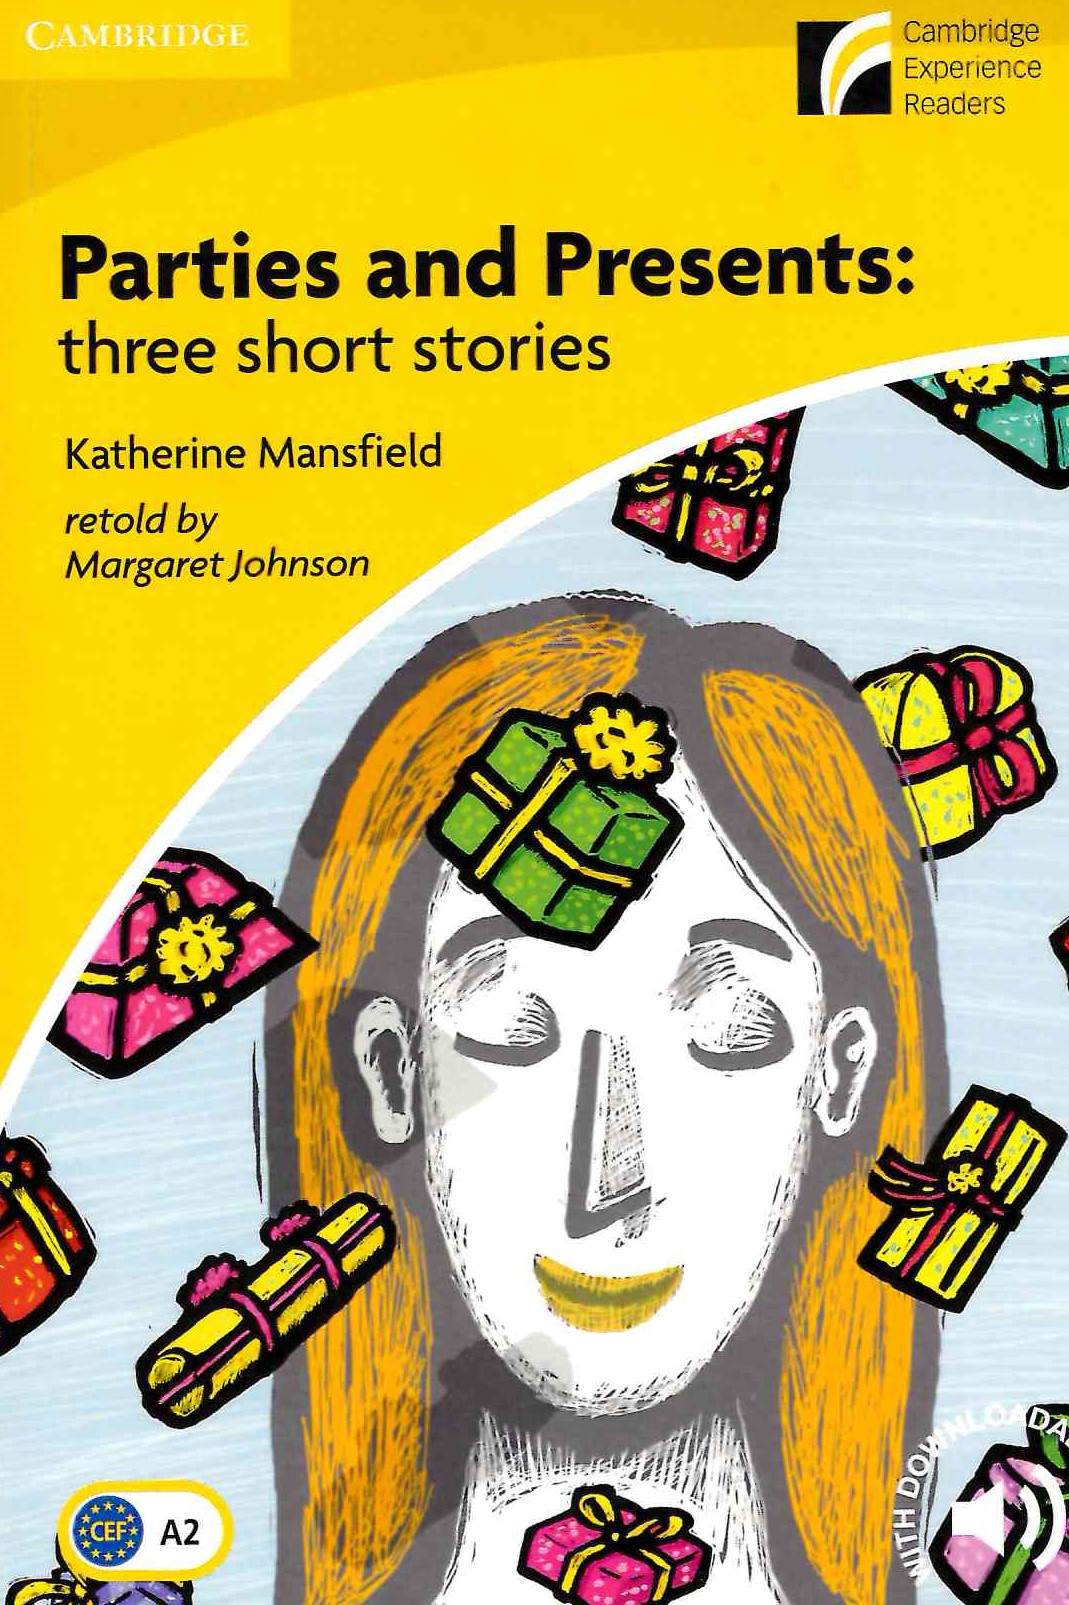 Parties and Presents: three short stories